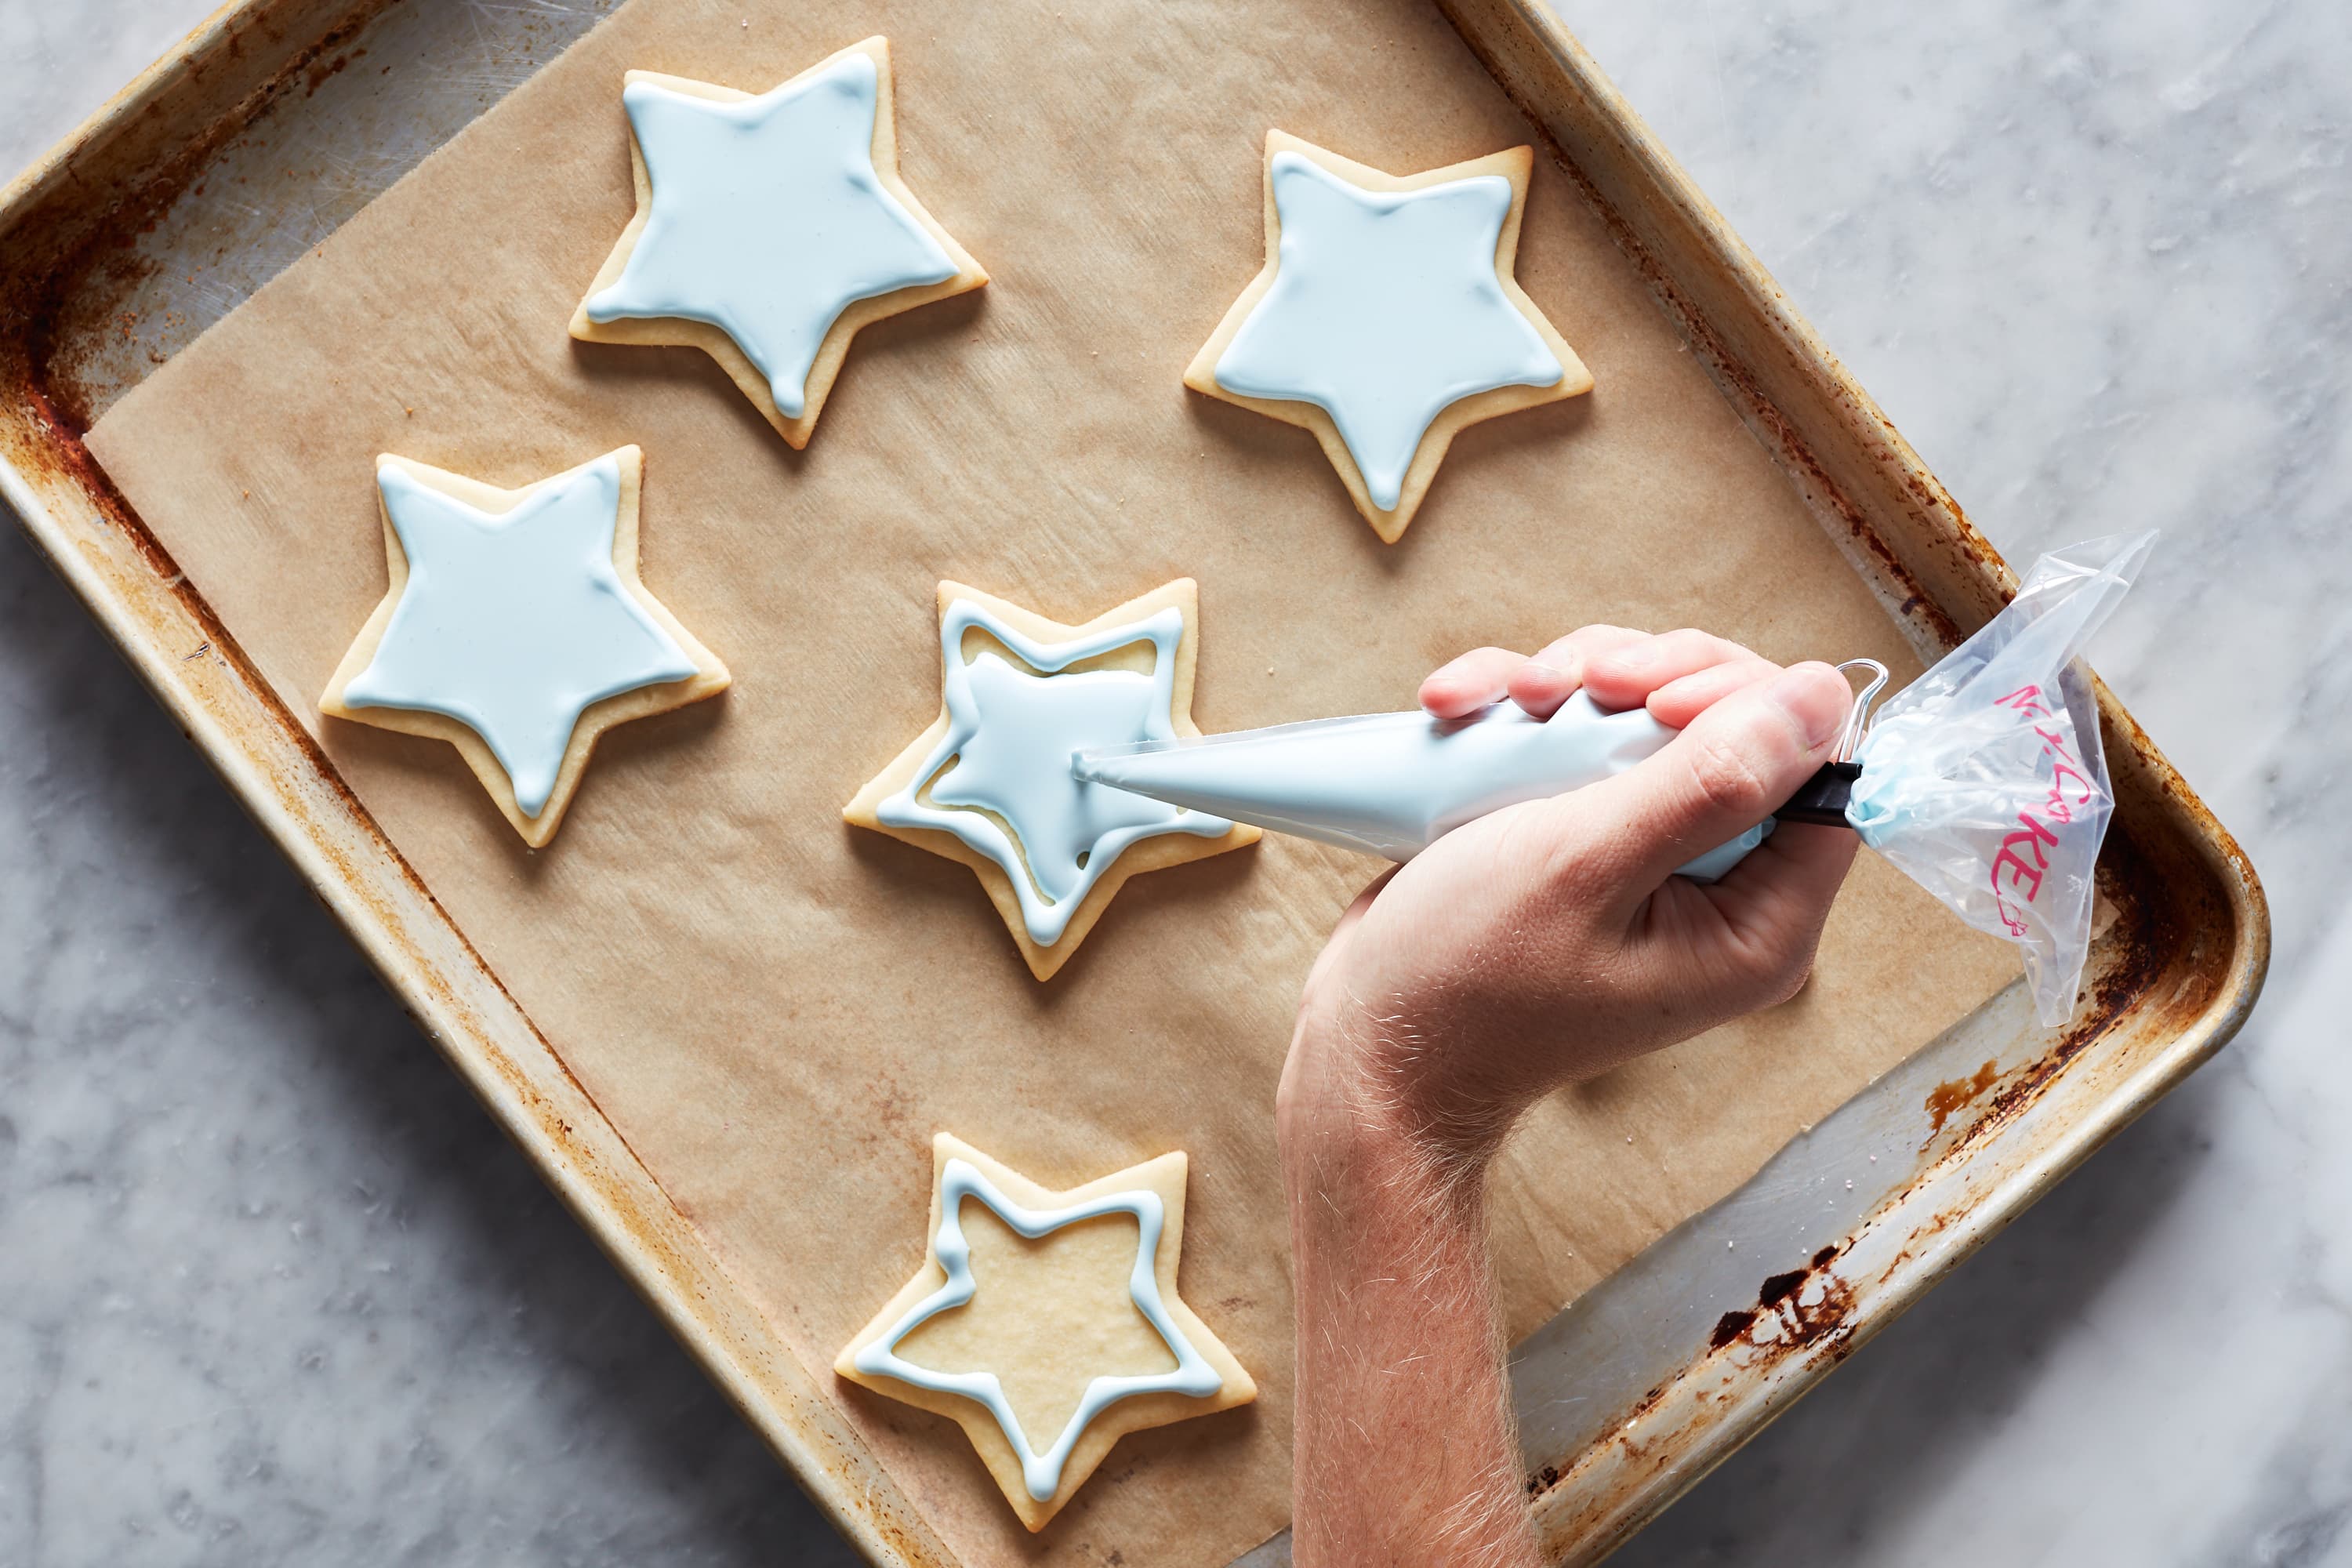 salario Competidores Hombre rico How to Make Easy Royal Icing for Cookie Decorating | Kitchn